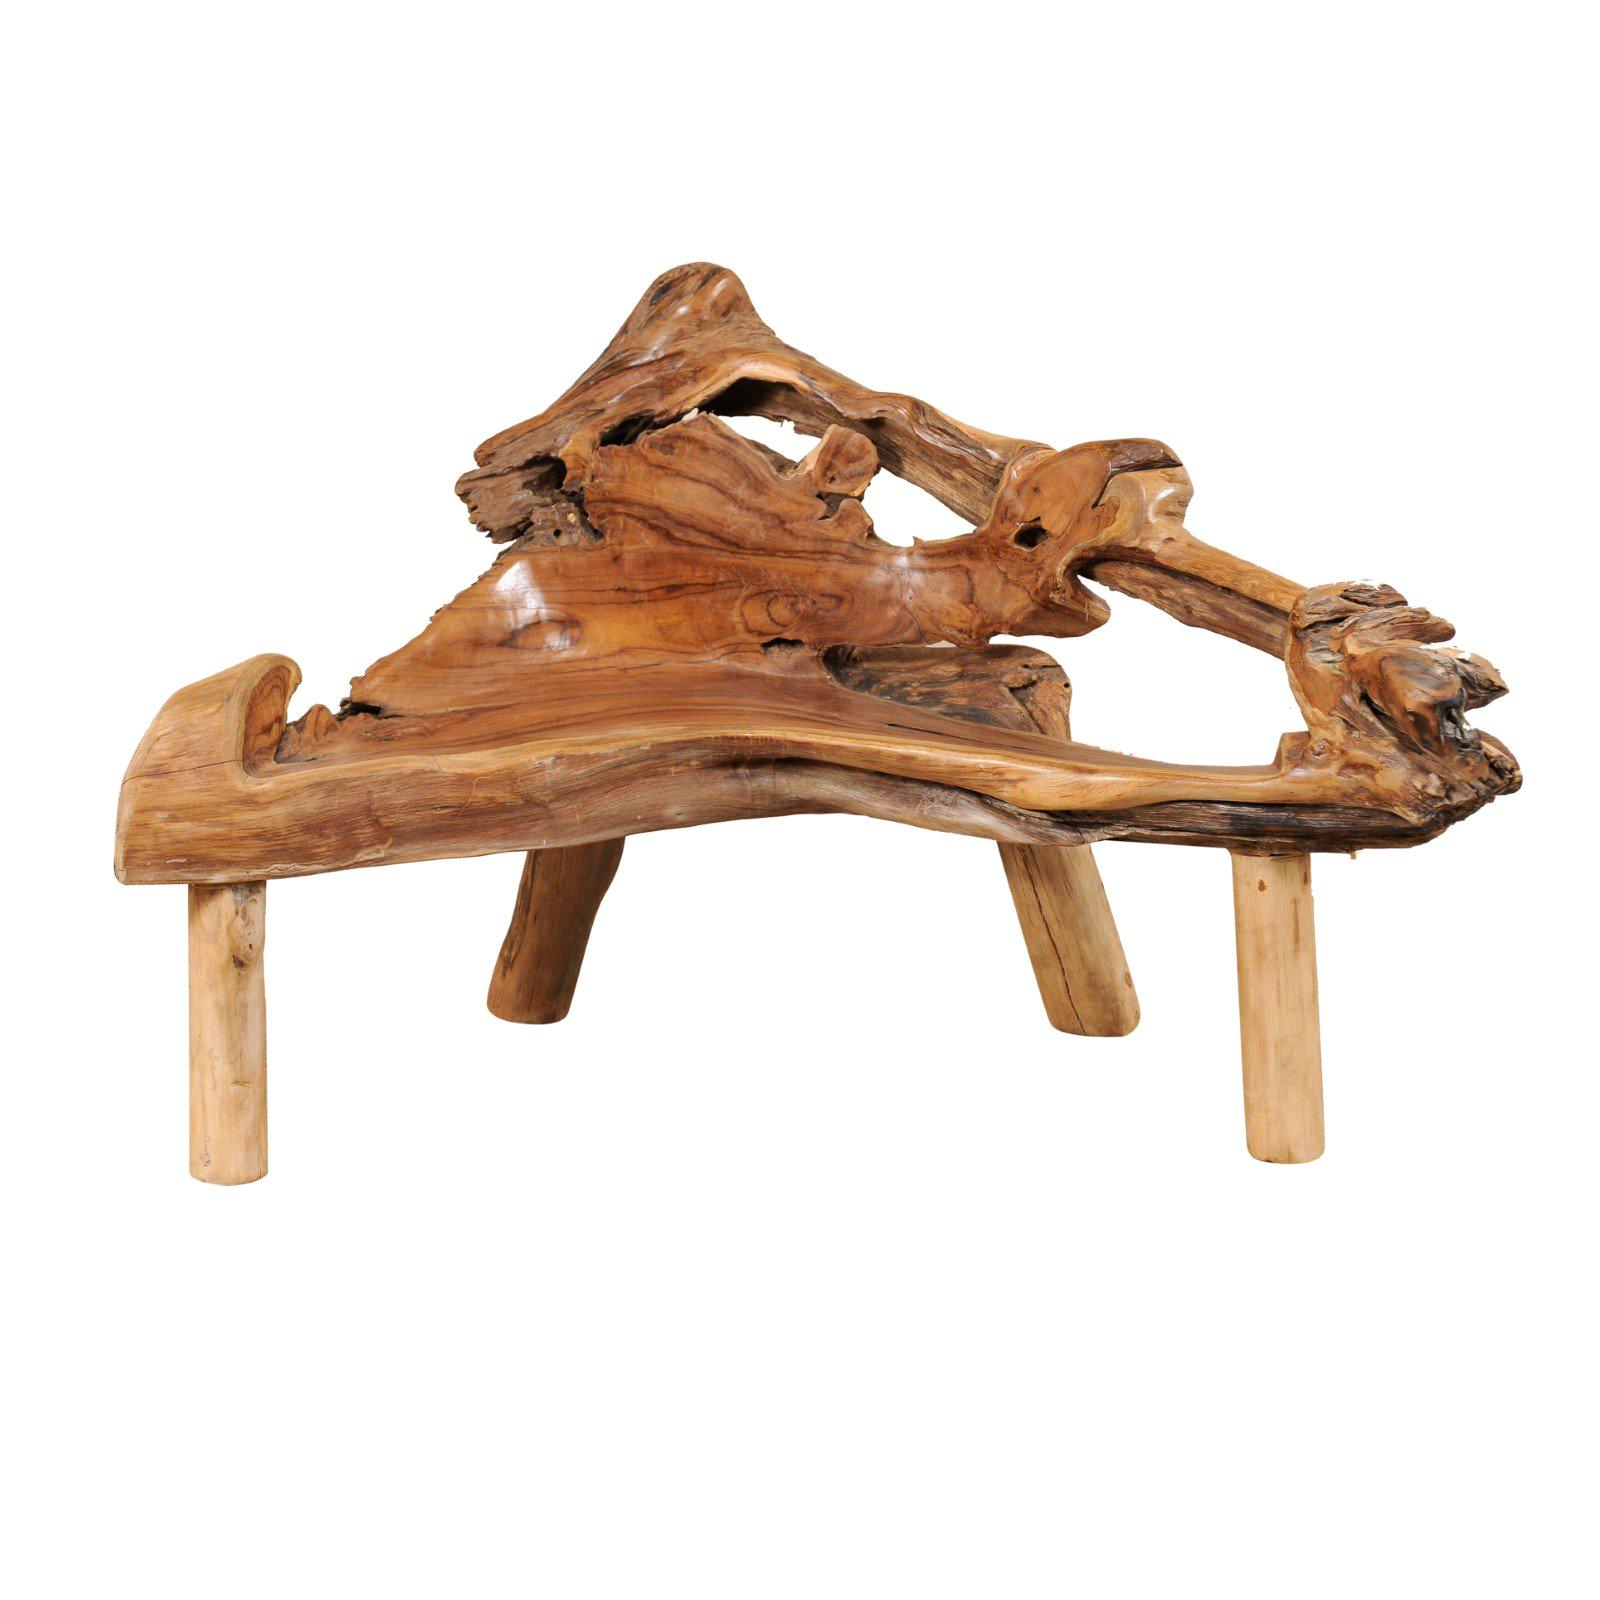 Teak Root and Limb Bench with Angular Shape and Live Edges